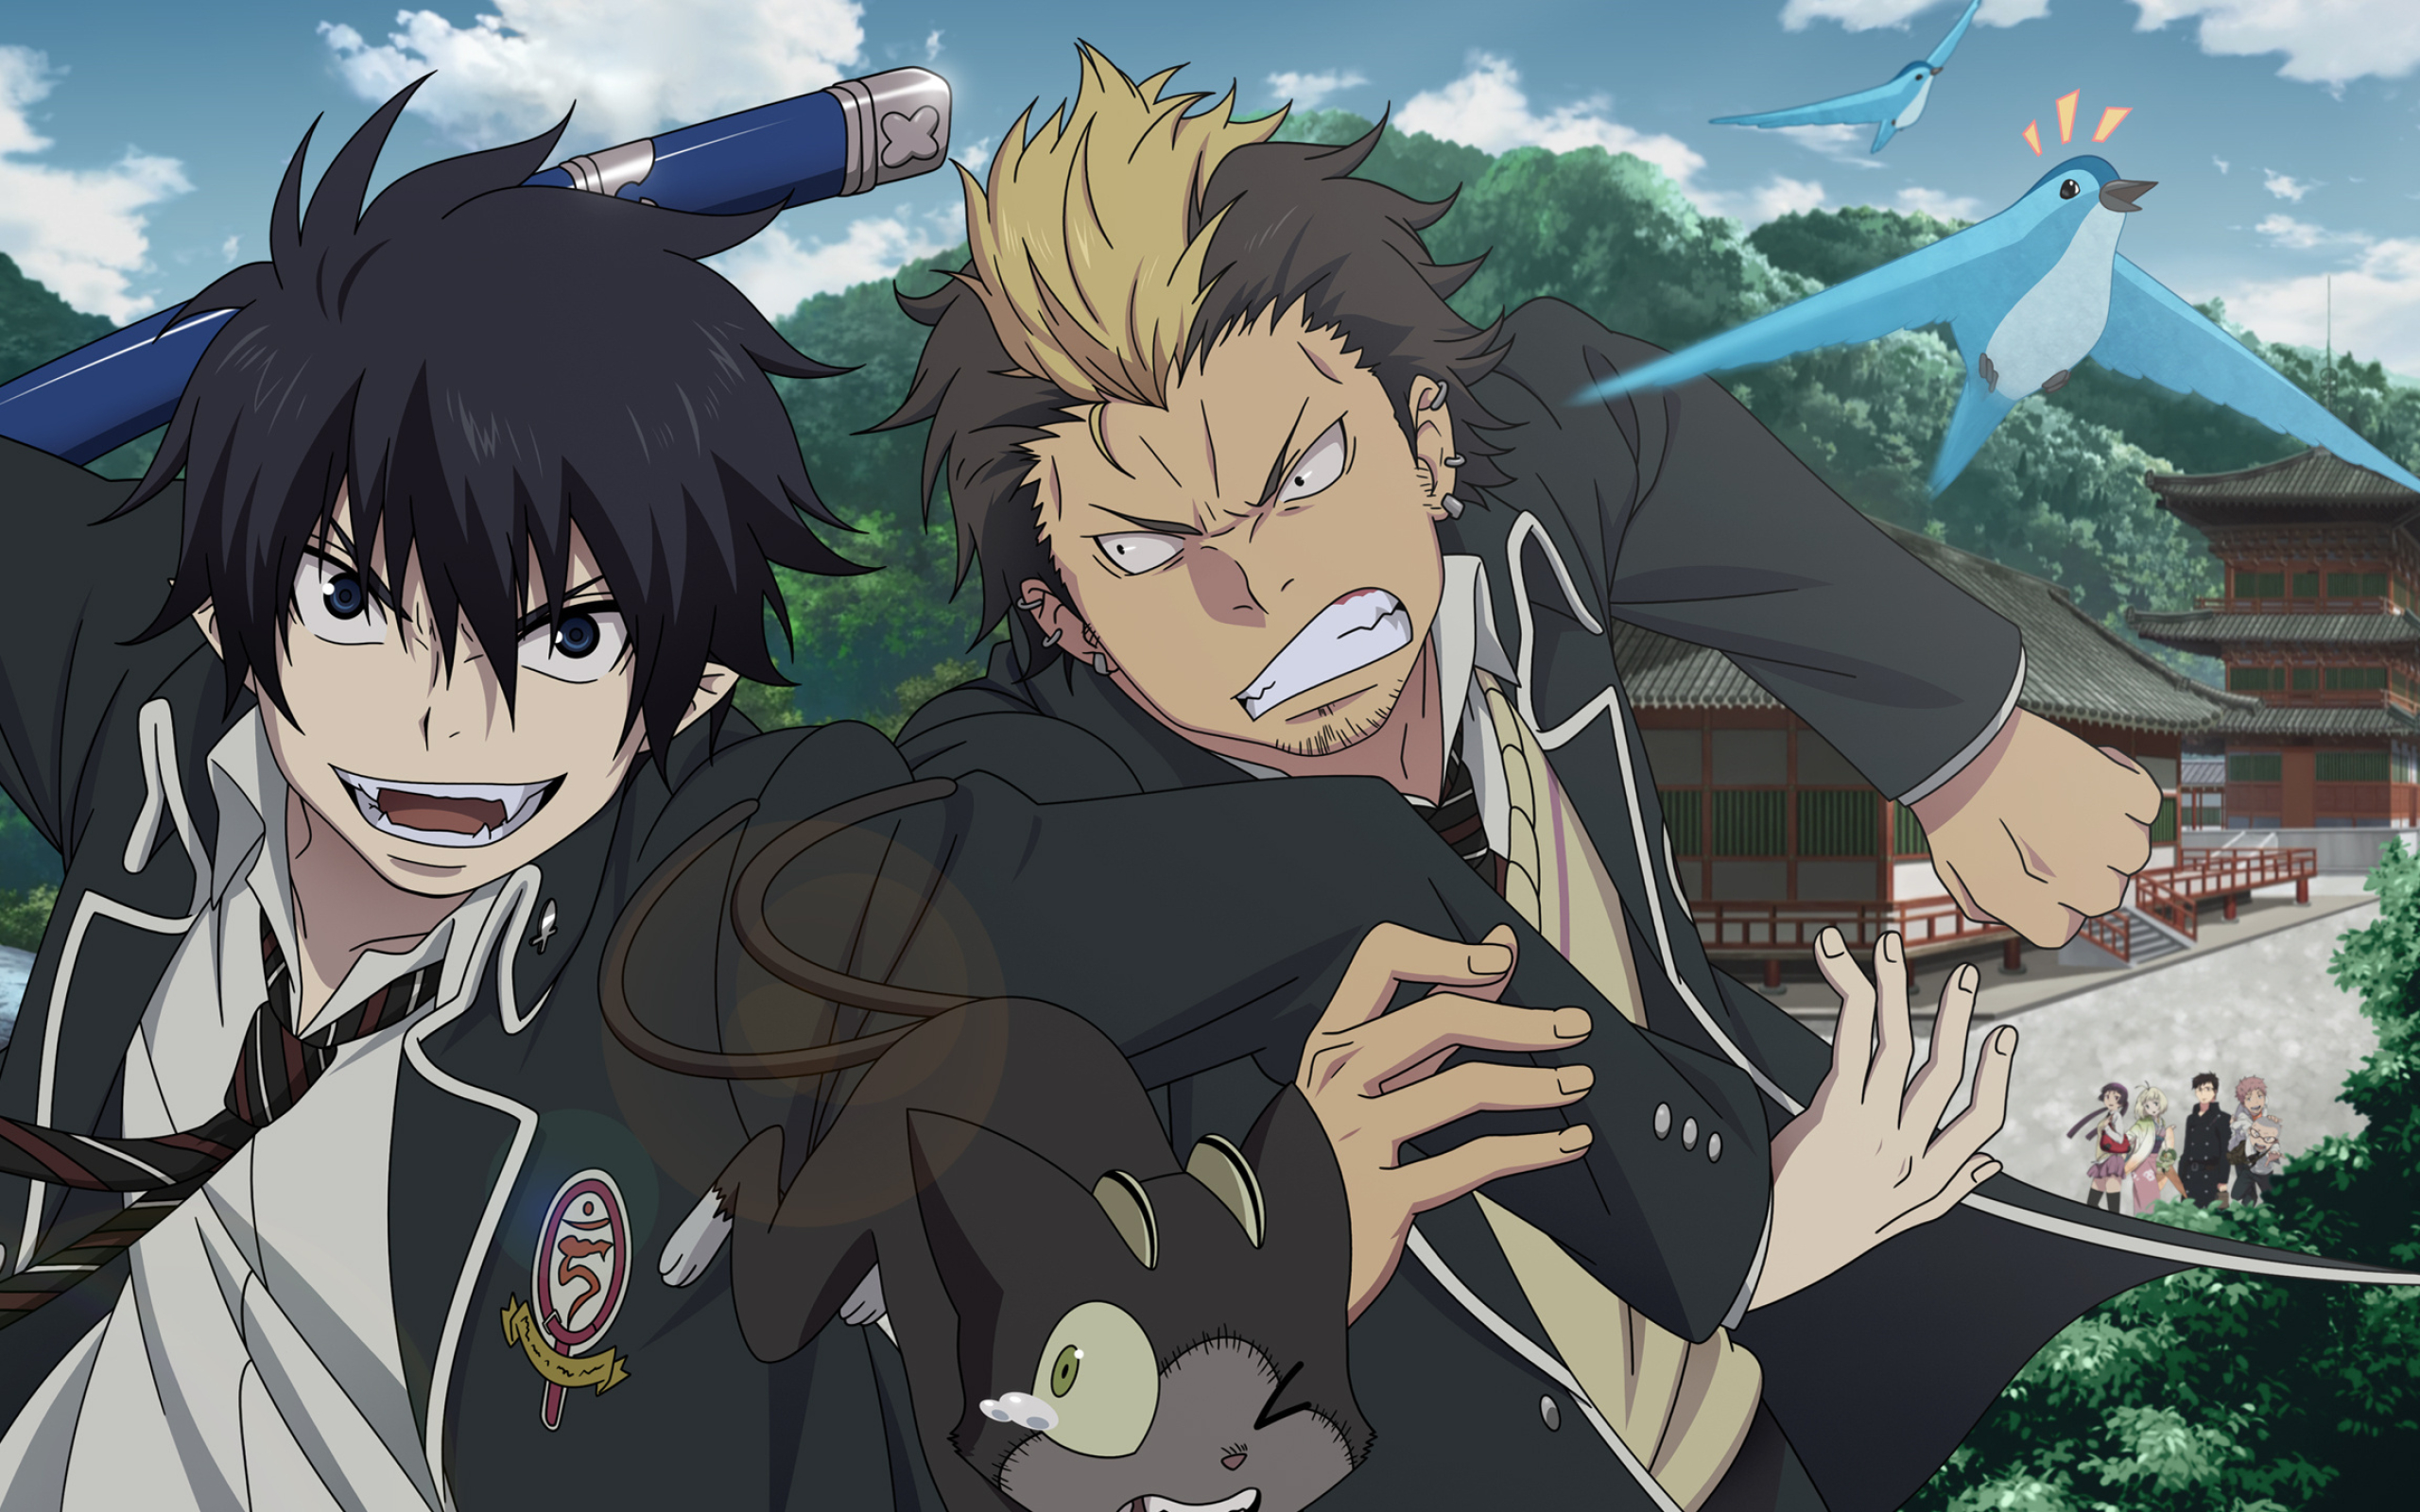 Blue Exorcist: An anime series about a teen boy who finds out he's the son of the devil. 2560x1600 HD Wallpaper.